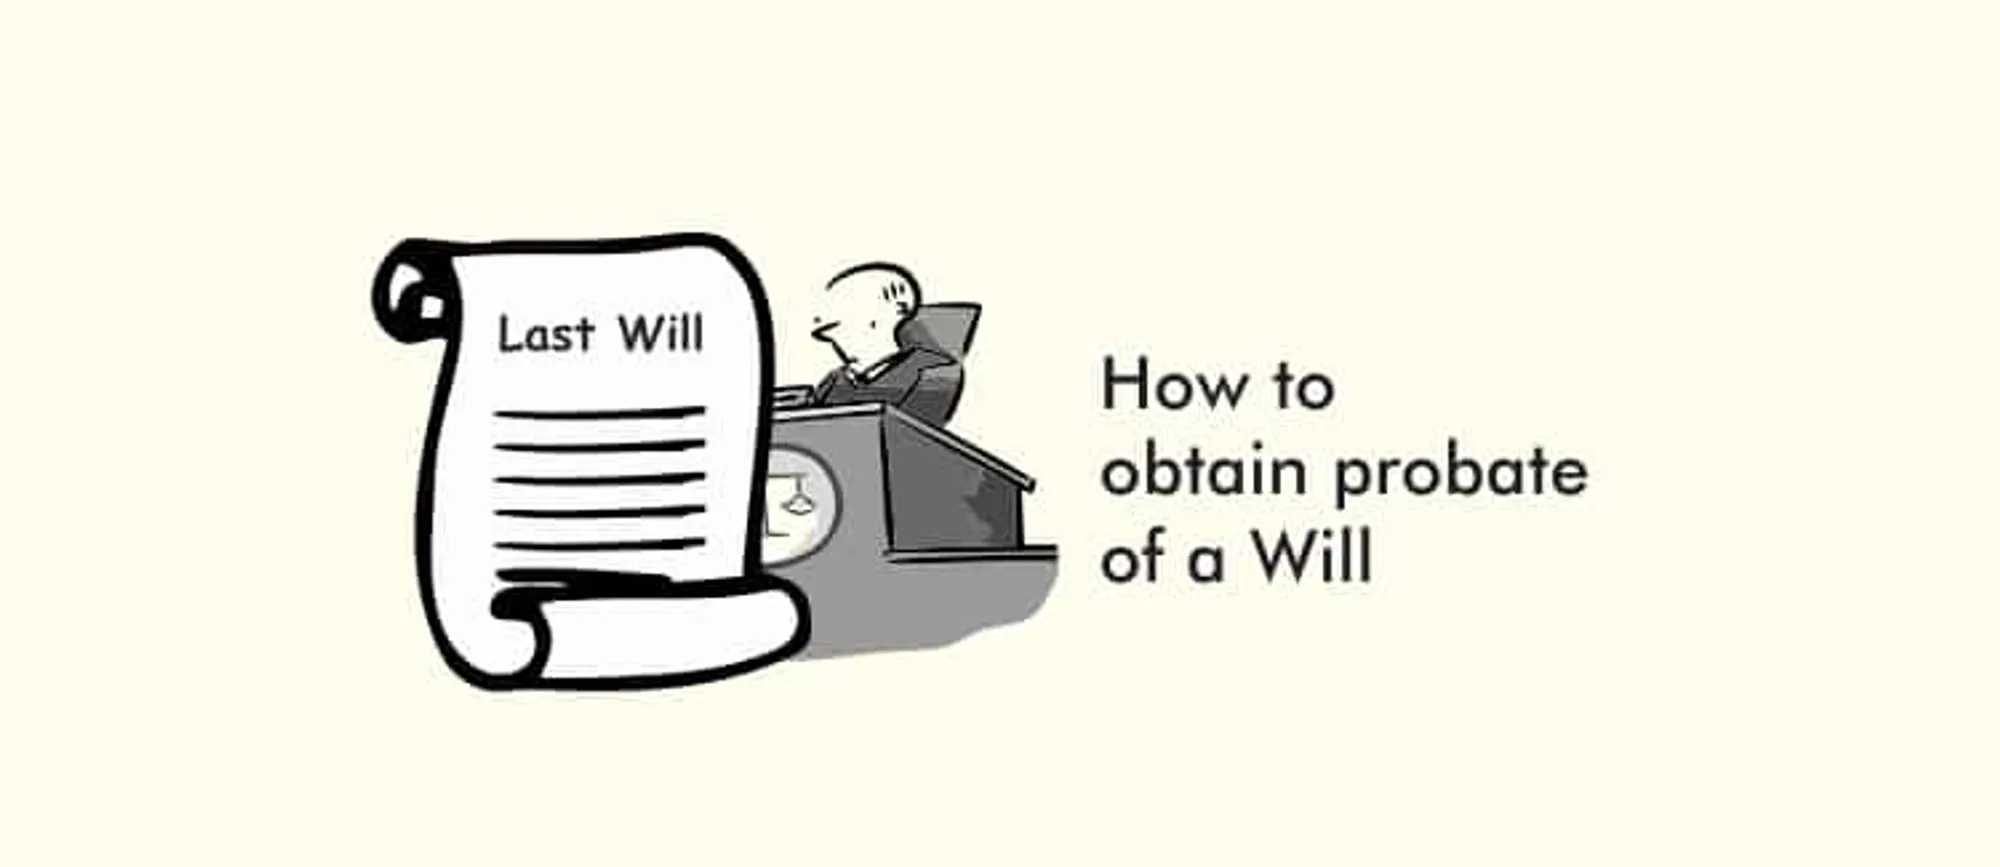 How to obtain probate of a Will